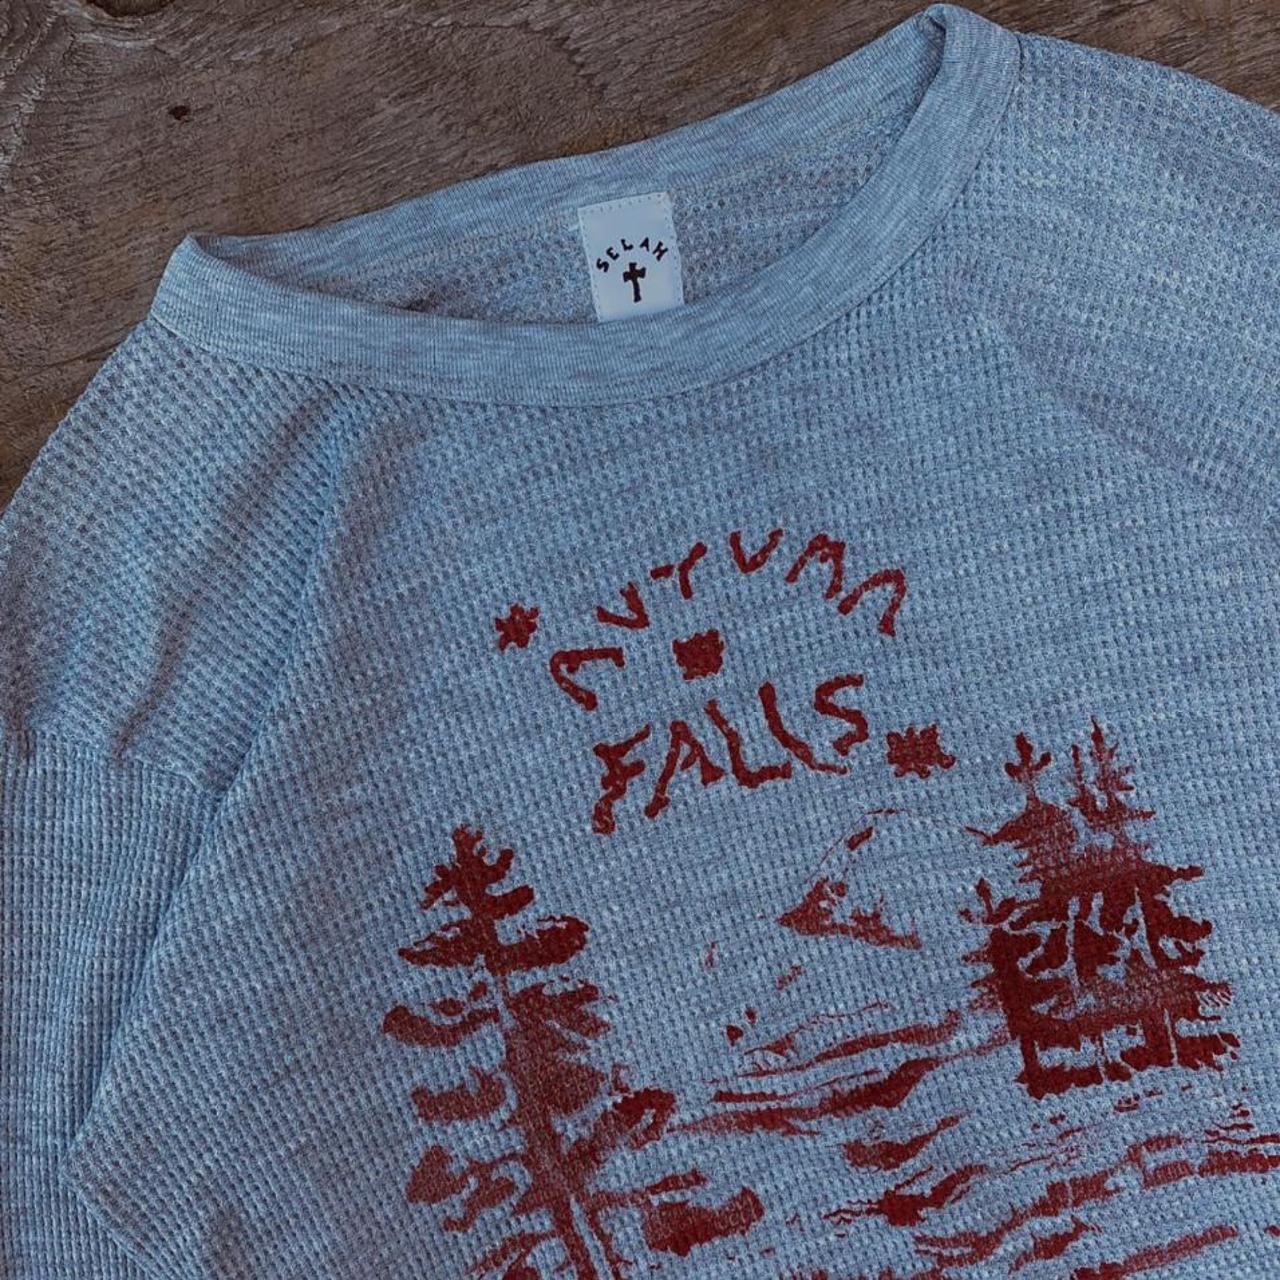 Product Image 2 - Autumn Falls Thermal Shirt

printed by